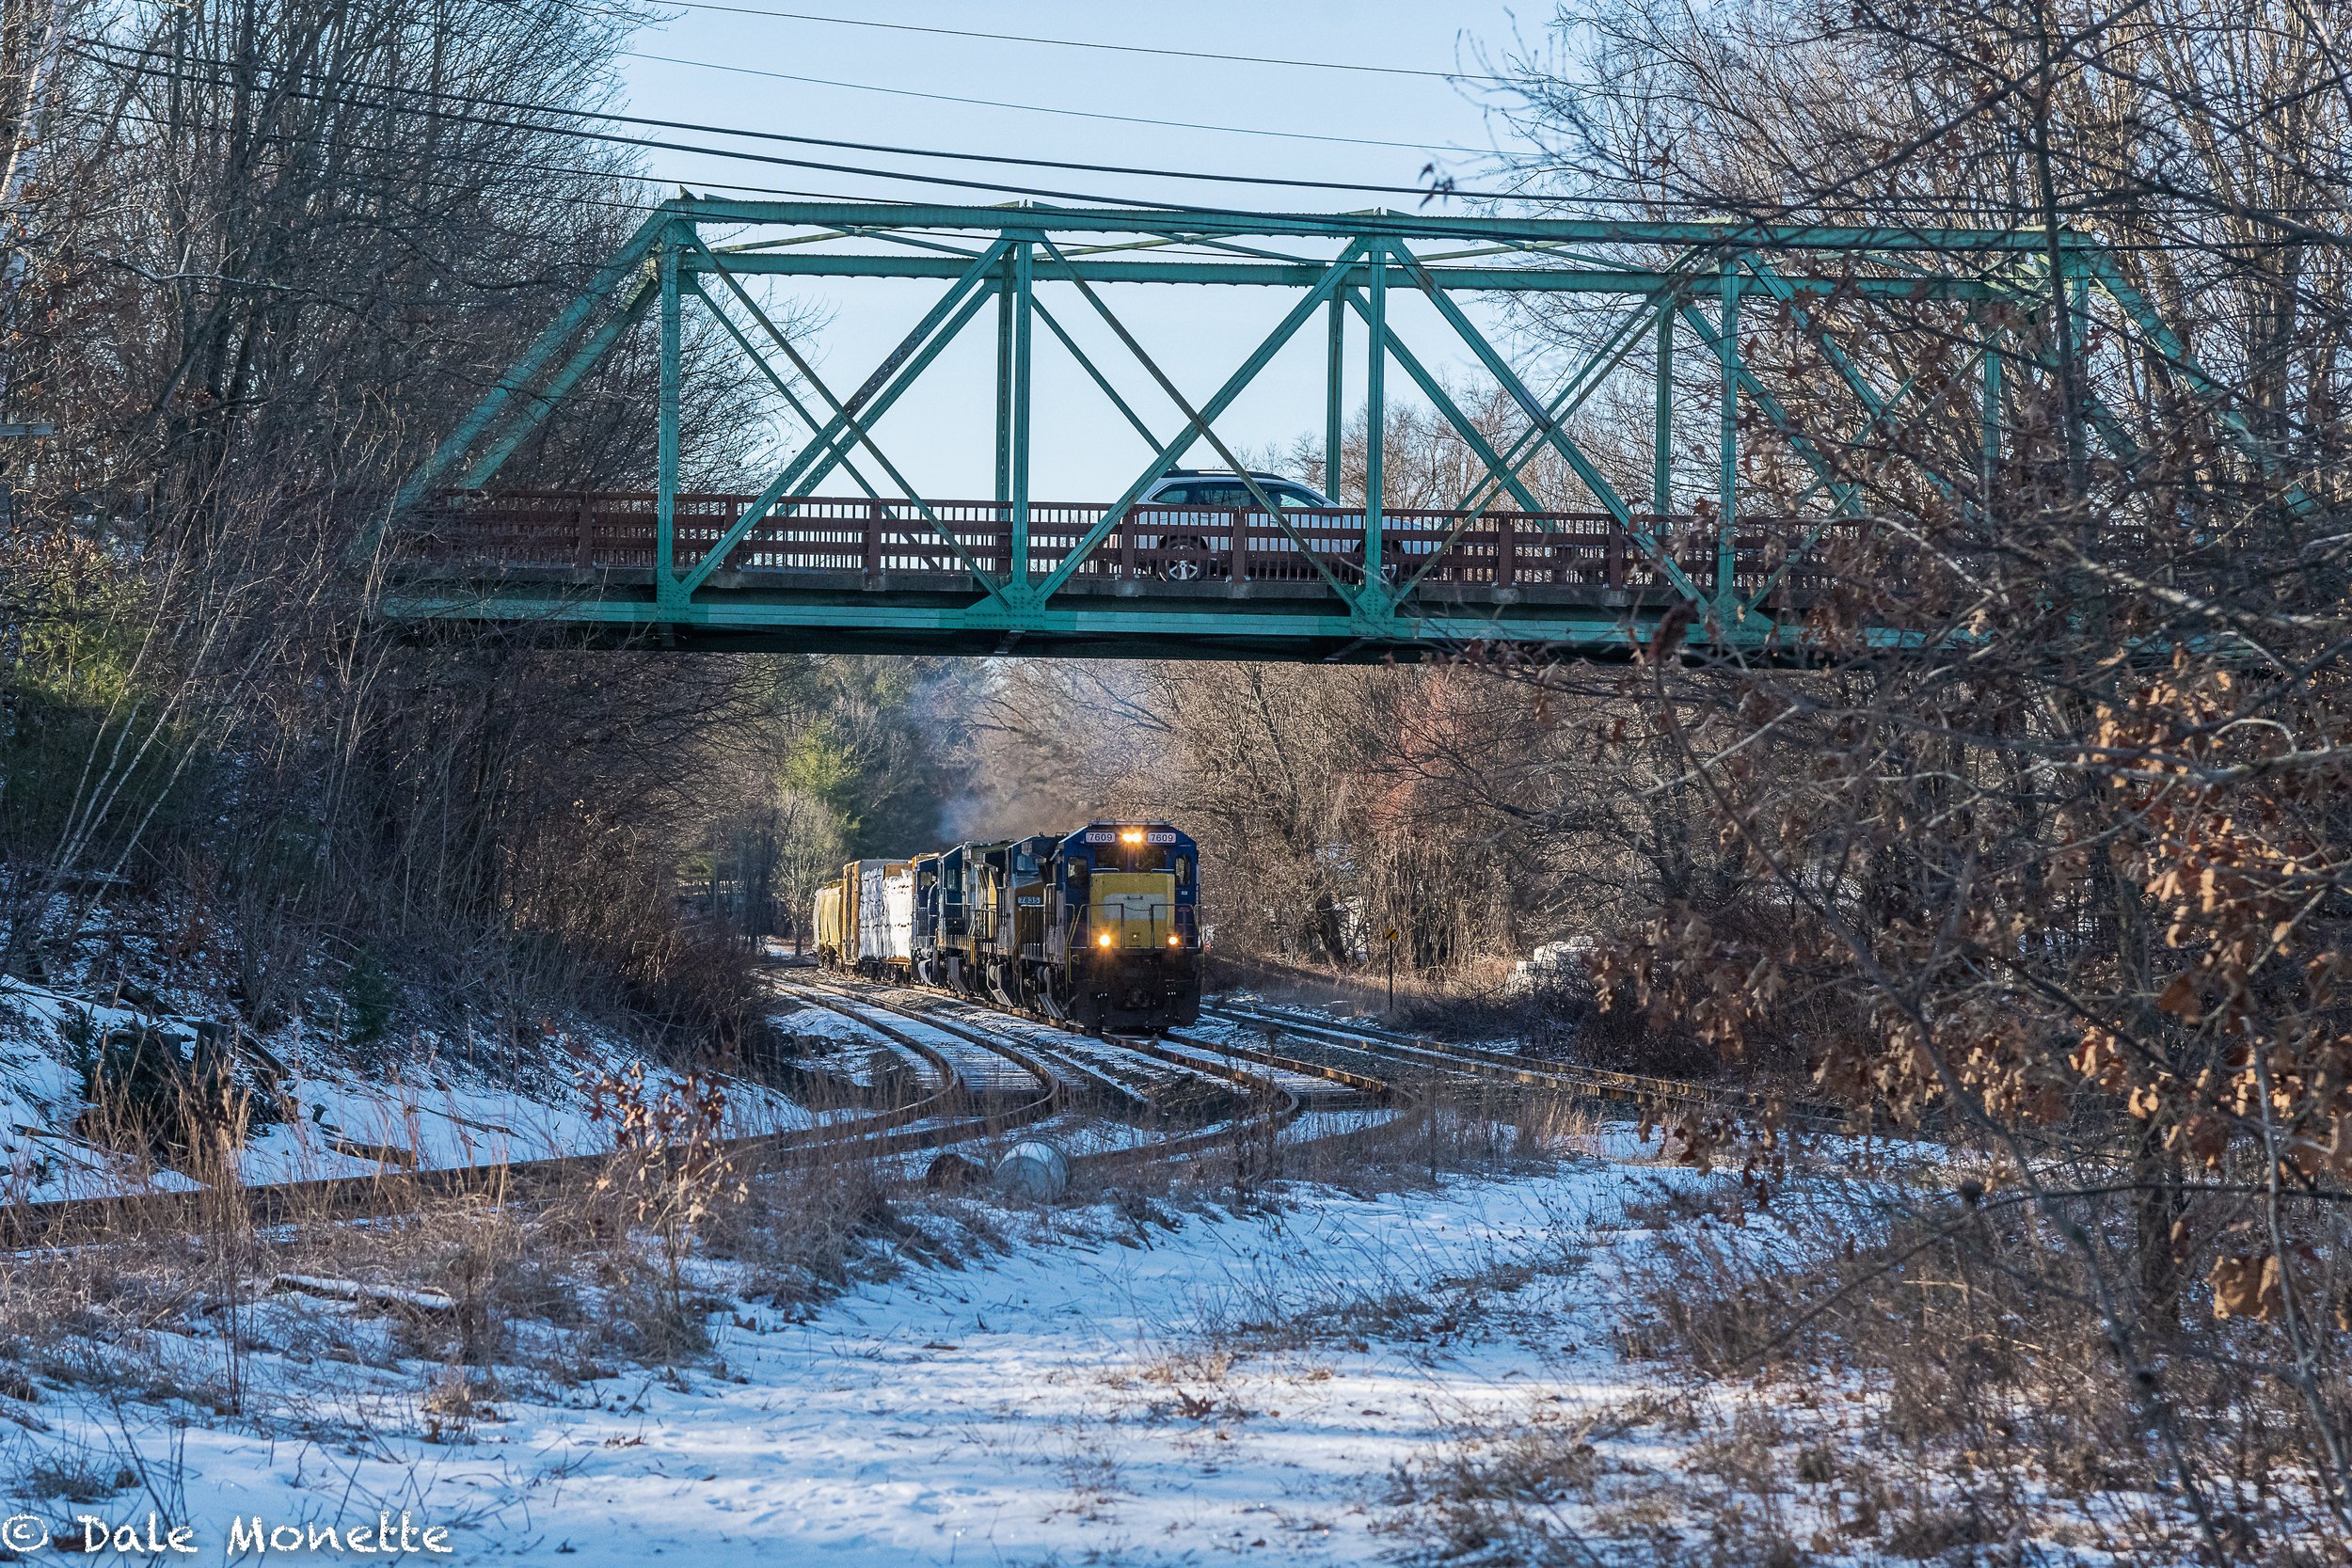   I cant resist photographing trains and have always done it.  This train was headed to Portland Maine from East Deerfield, MA on the CSX Northern New England branch on December 26th, 2022 at 8AM in Millers Falls MA.    